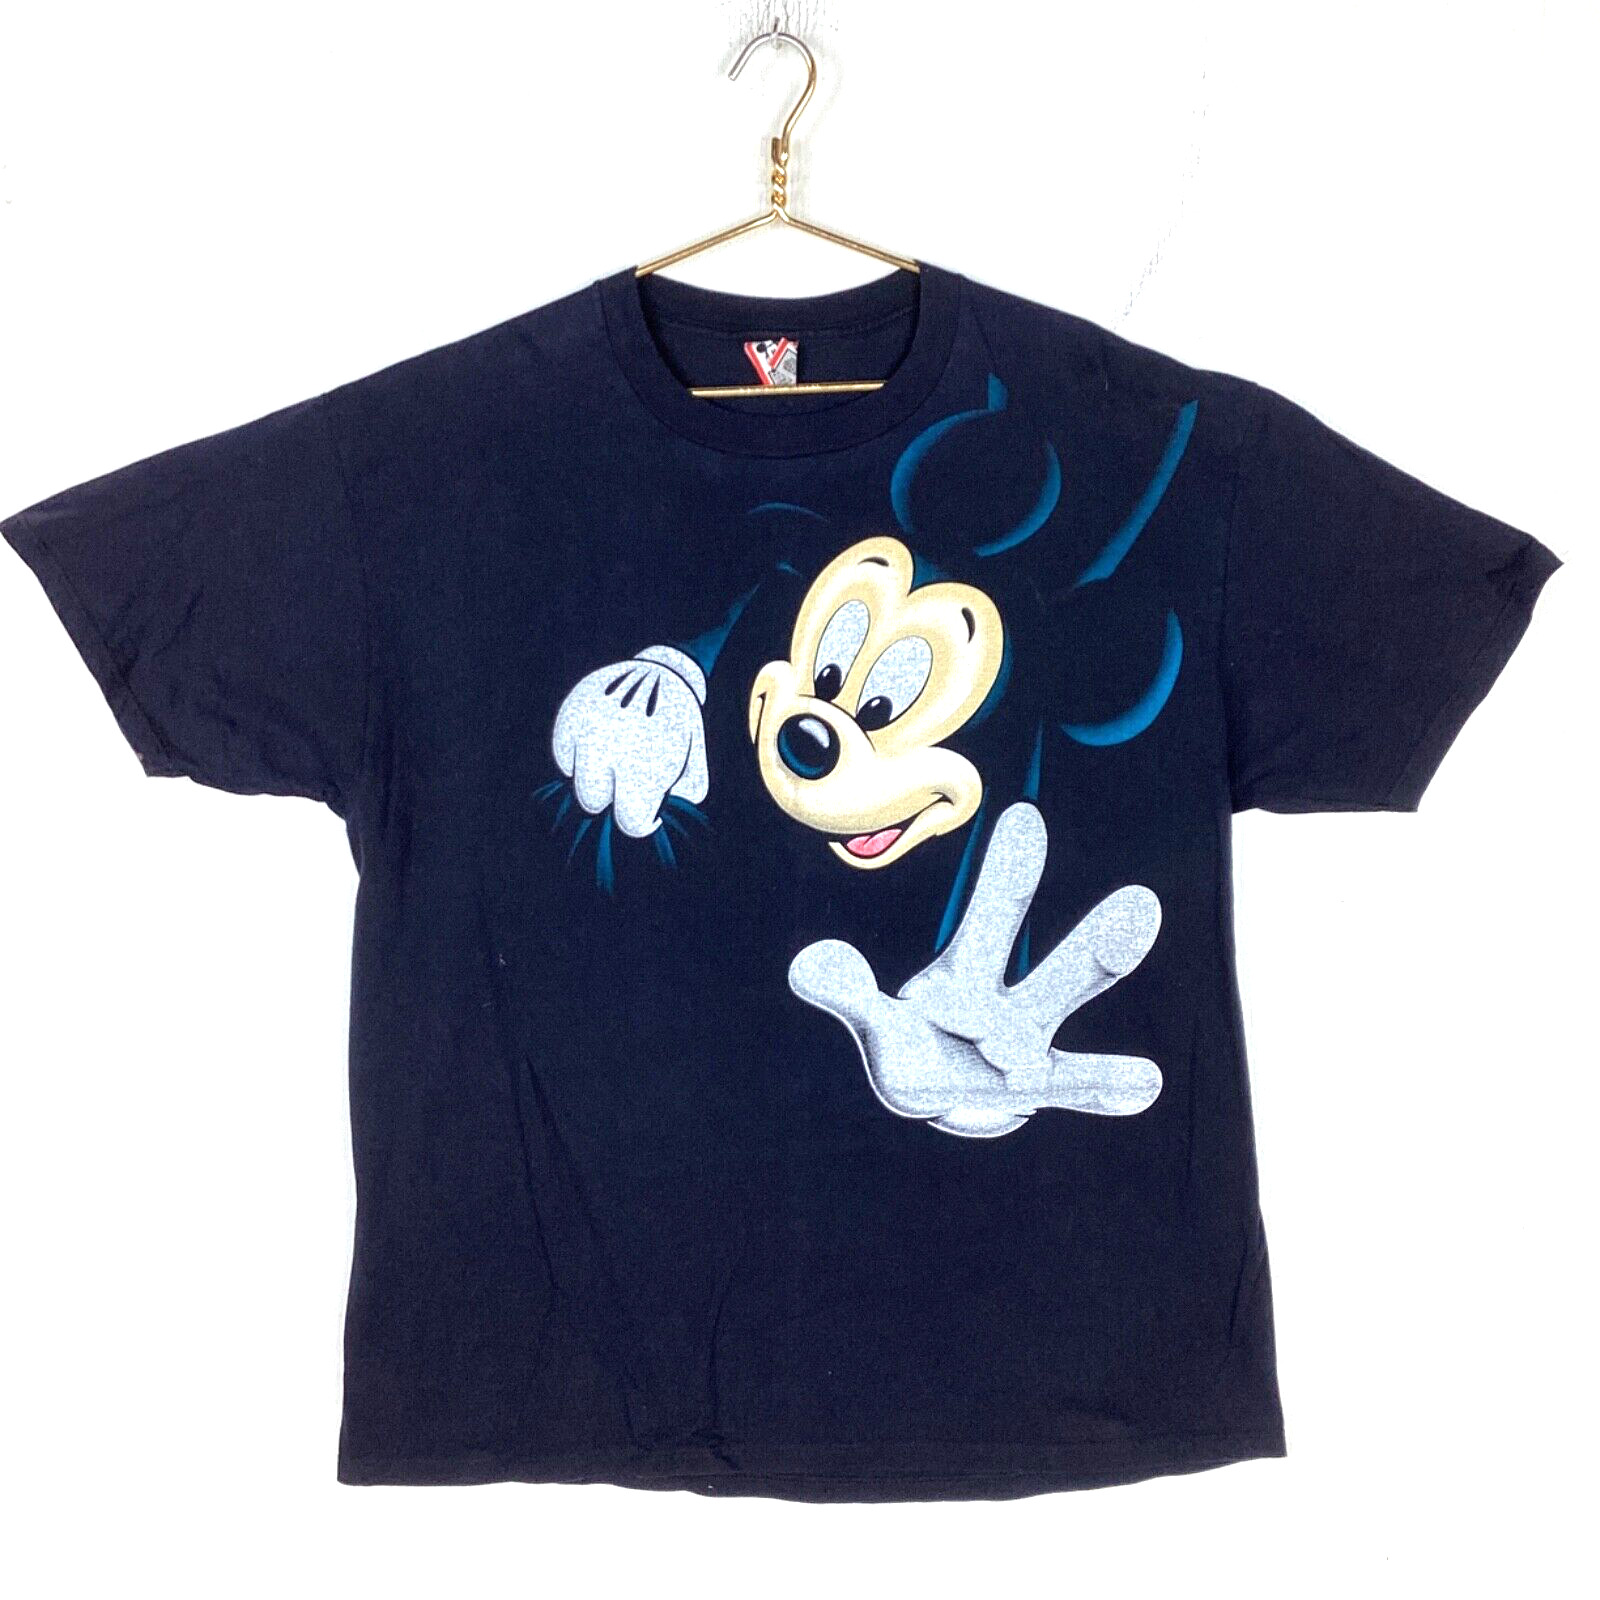 Vintage Mickey Mouse T-Shirt 2XL Black Made In Usa Disney 90s